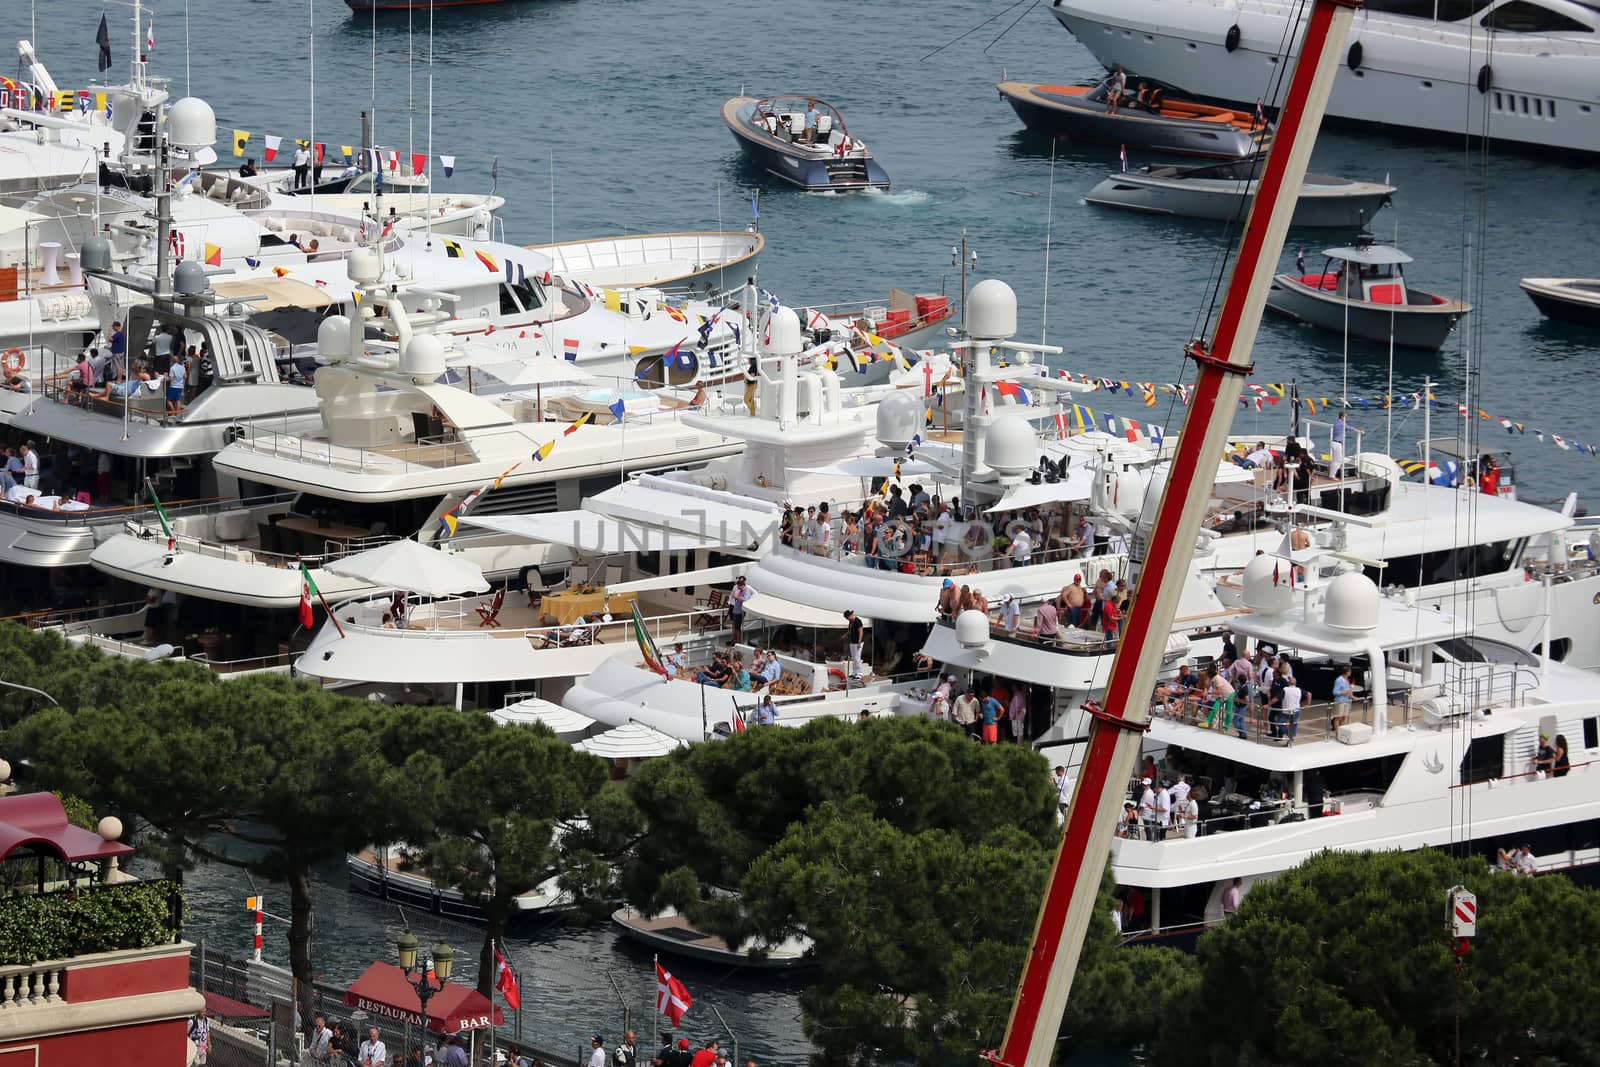 Spectators watch the F1 Monaco Grand Prix 2016 From the Yachts by bensib